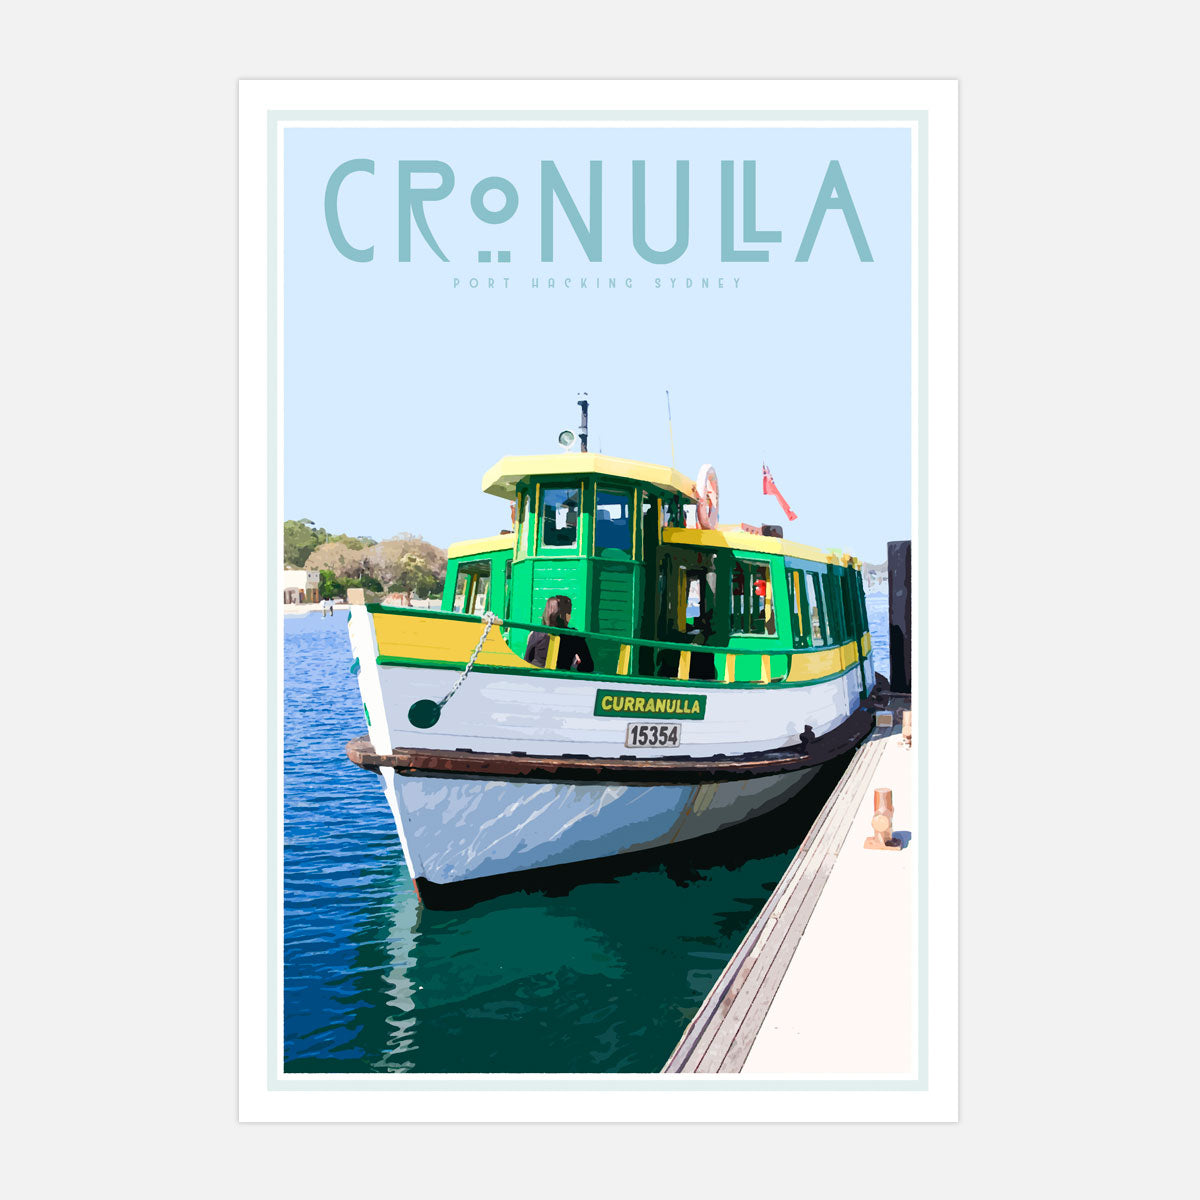 Cronulla ferry vintage style travel print, black frame, designed by places we luv